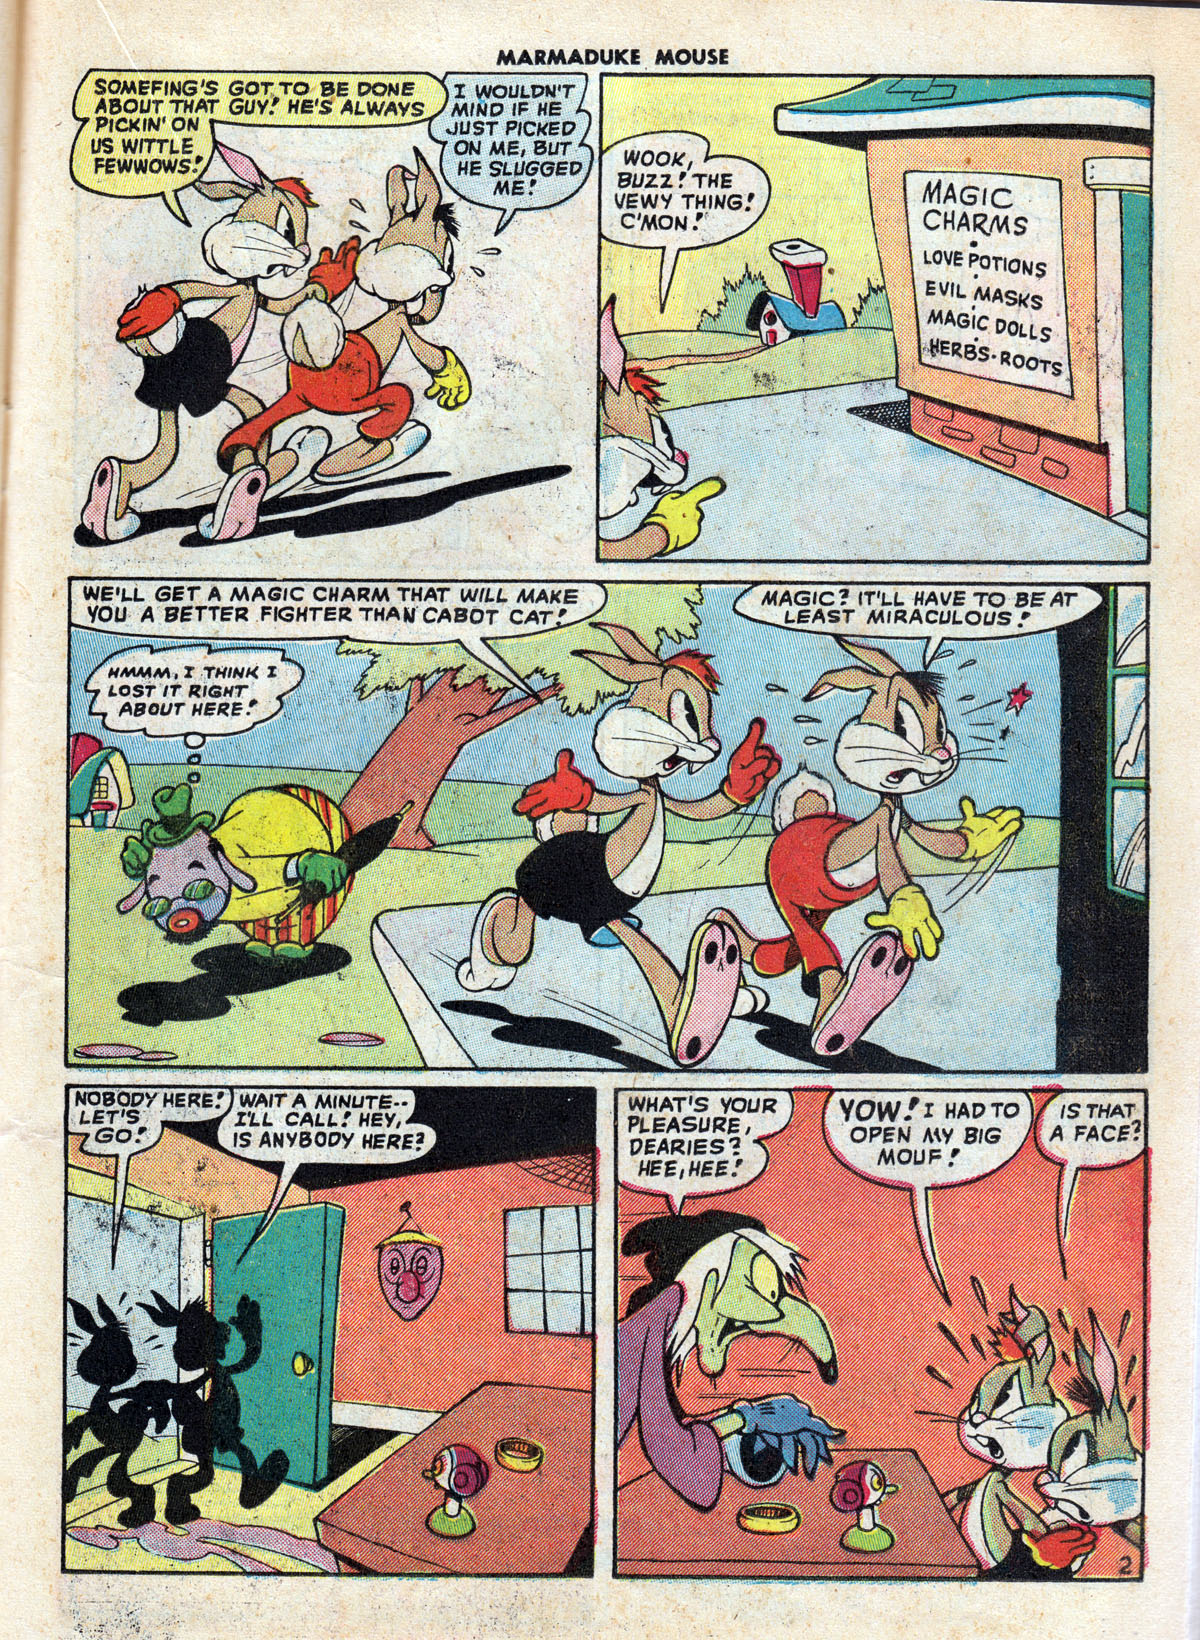 Read online Marmaduke Mouse comic -  Issue #10 - 21